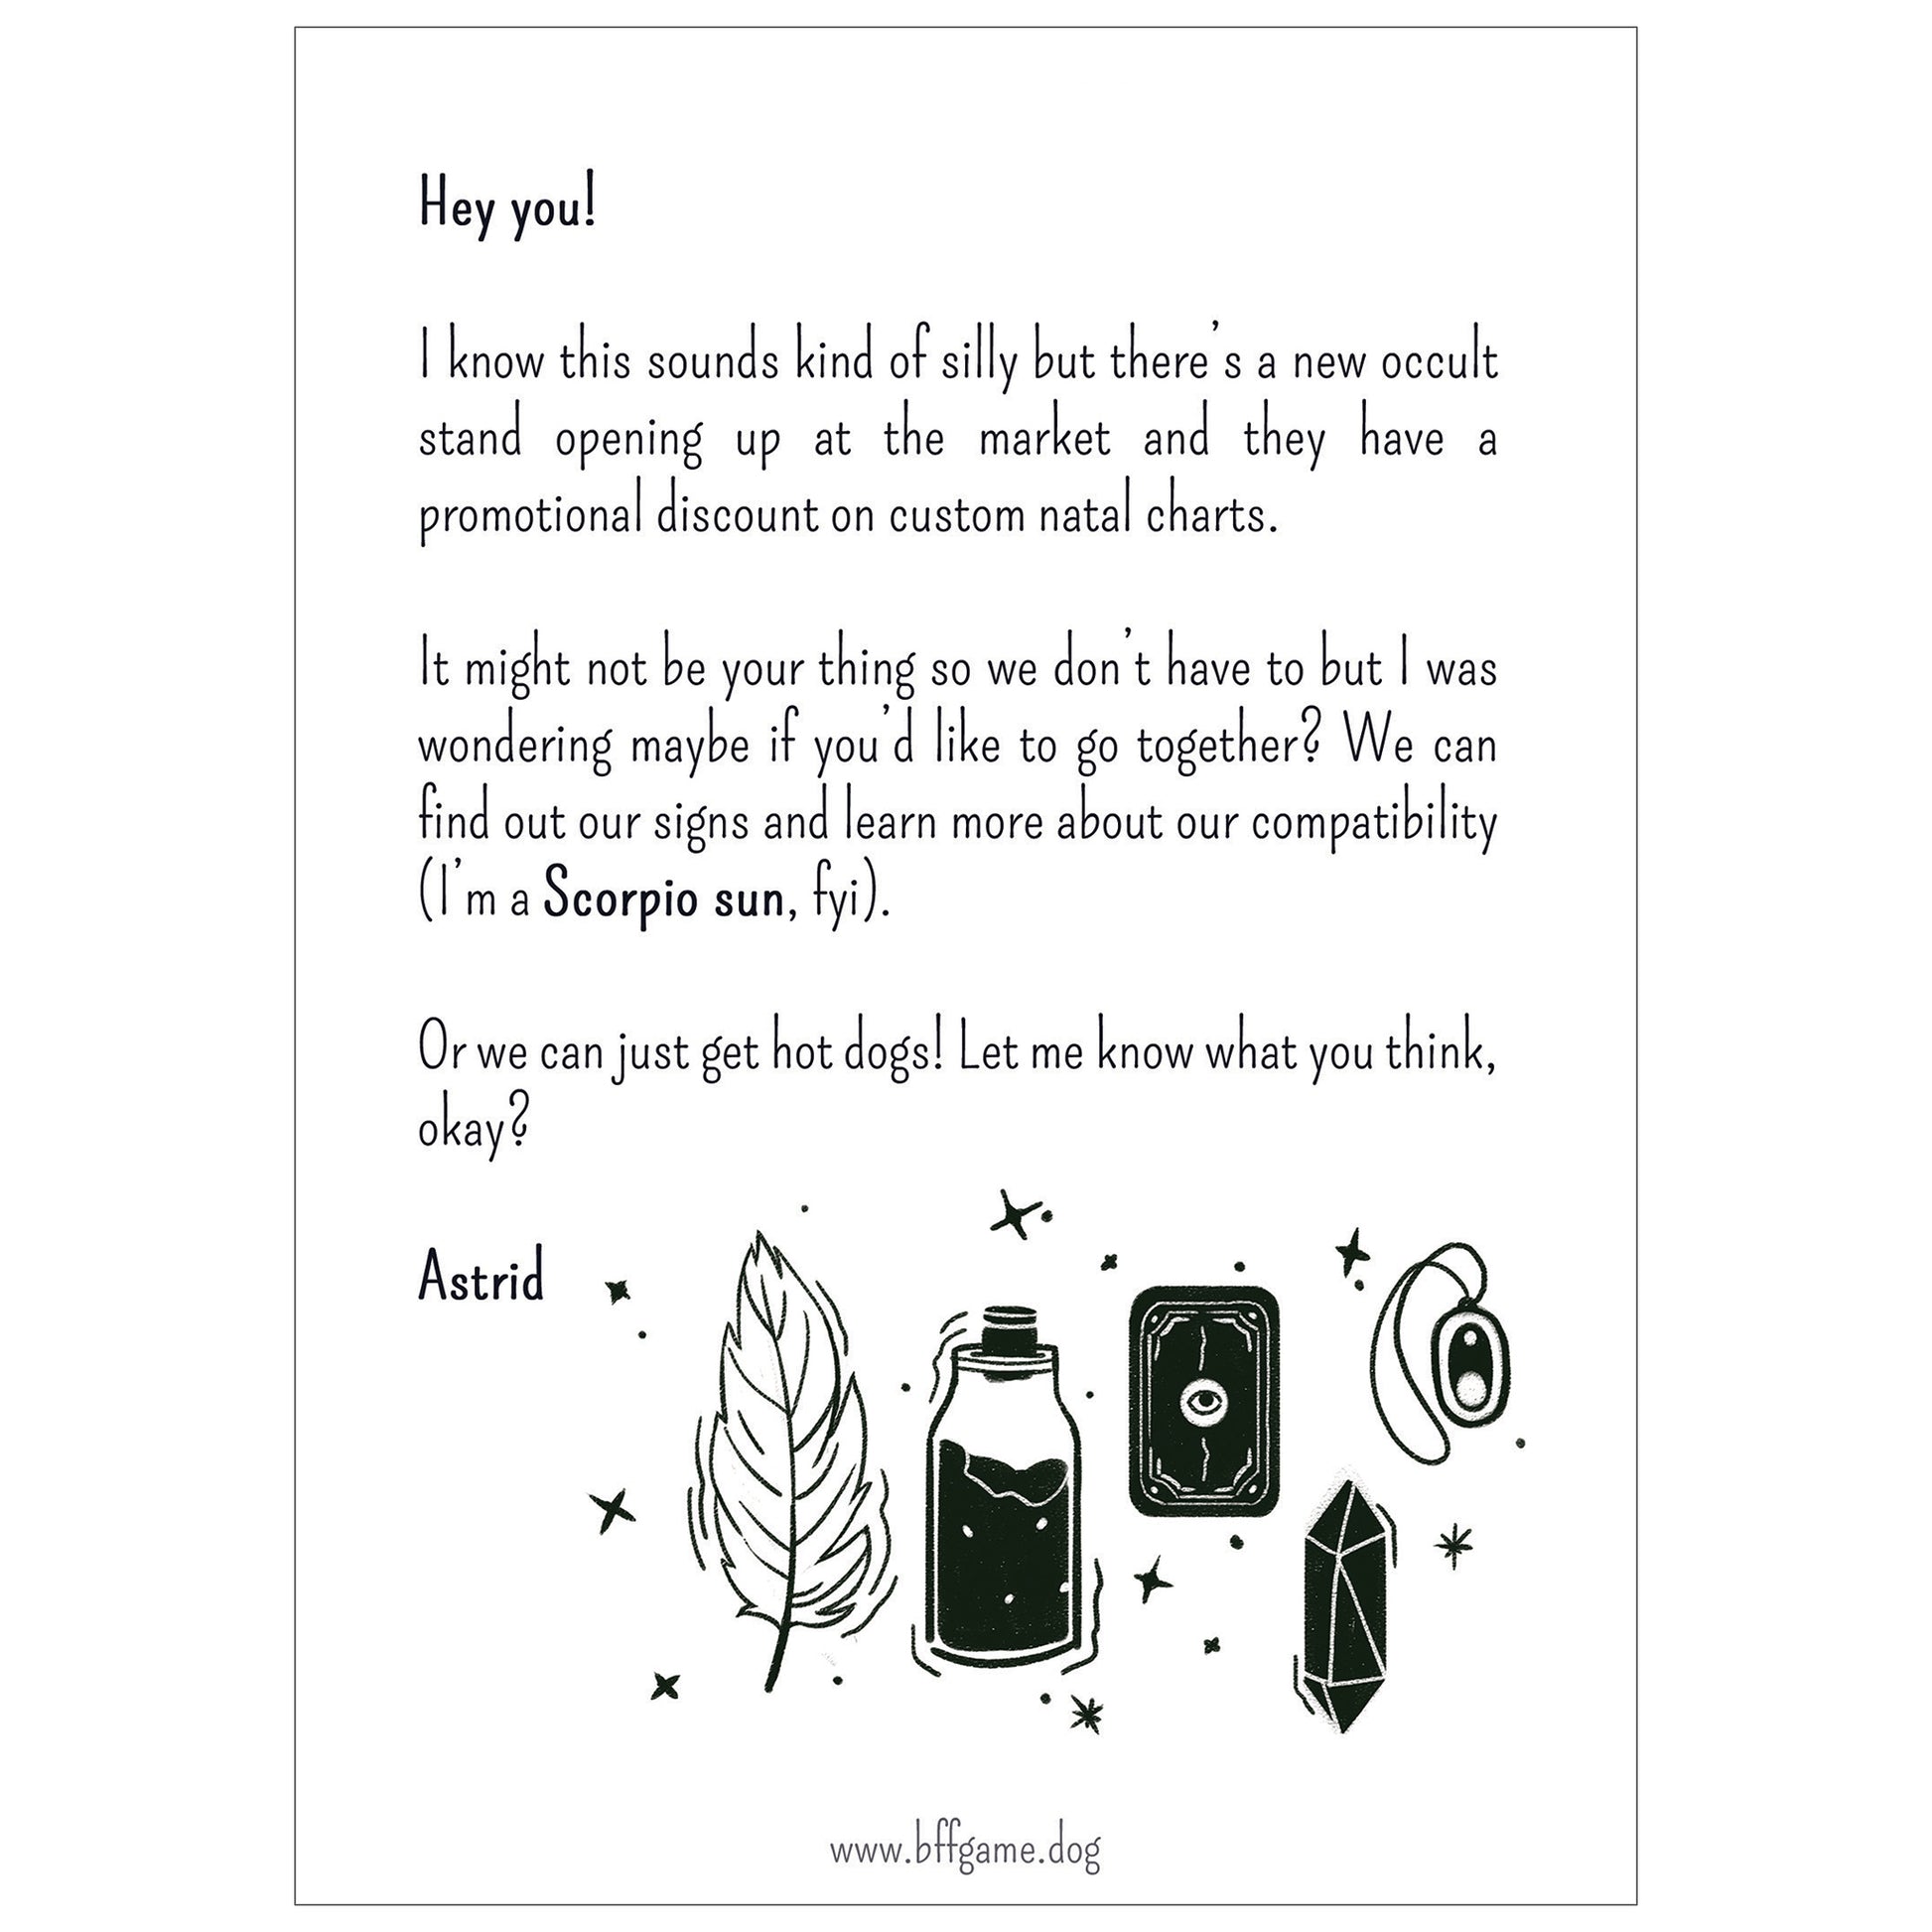 Mockup of a letter signed "Astrid" with stylized black and white drawings of a feather, a potion, a tarot card, an amulet, and a crystal, surrounded by sparkles. White background.